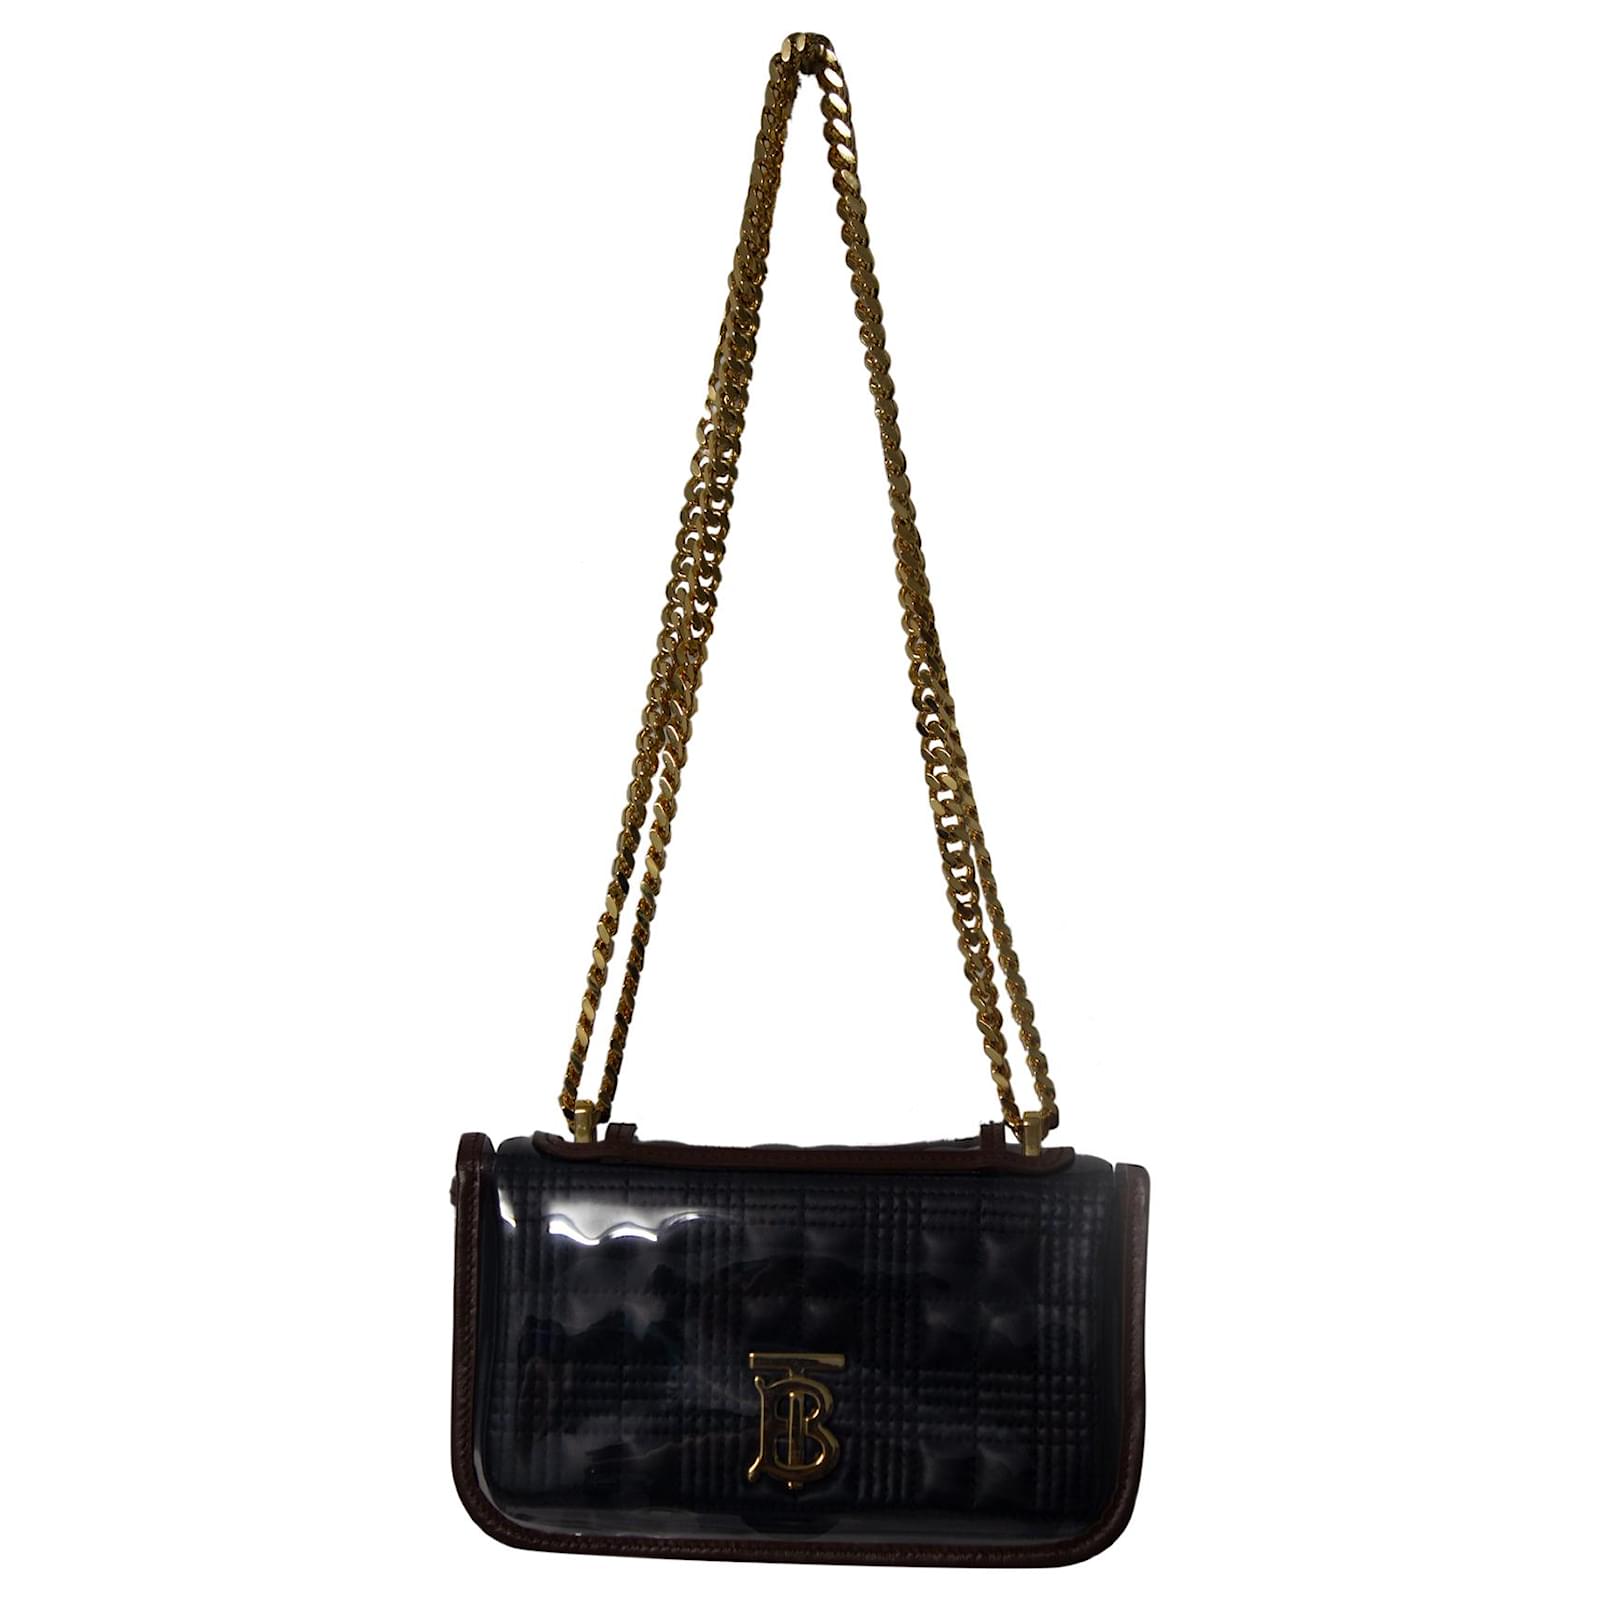 Burberry Lola Small Quilted Leather Shoulder Bag - Black